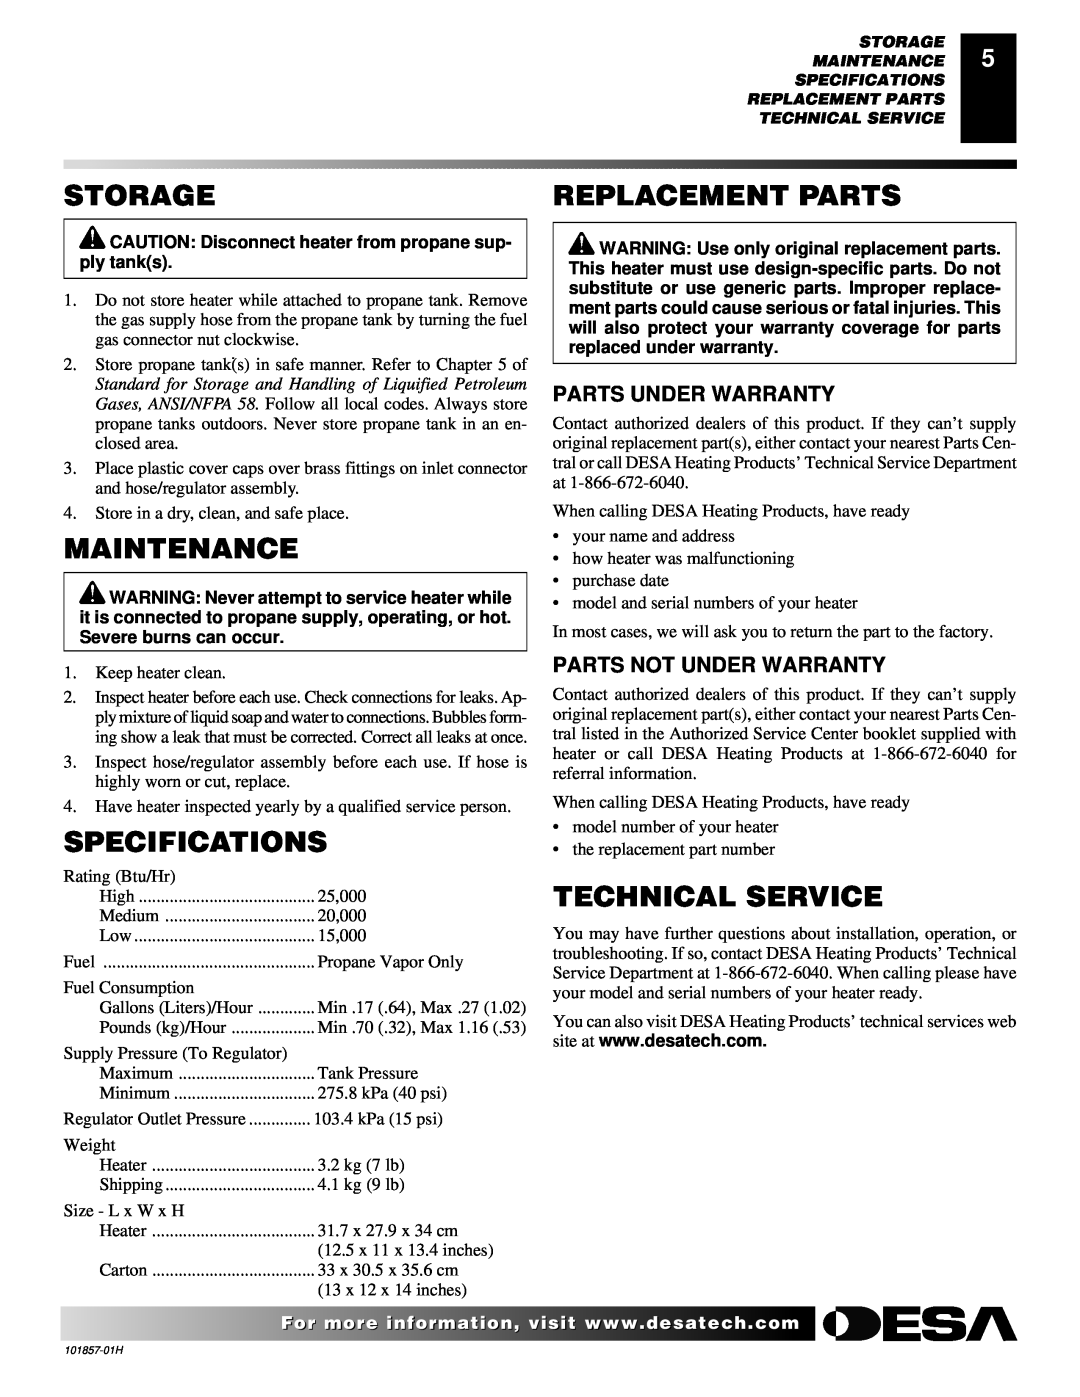 Desa TC25 owner manual Storage, Replacement Parts, Maintenance, Specifications, Technical Service 